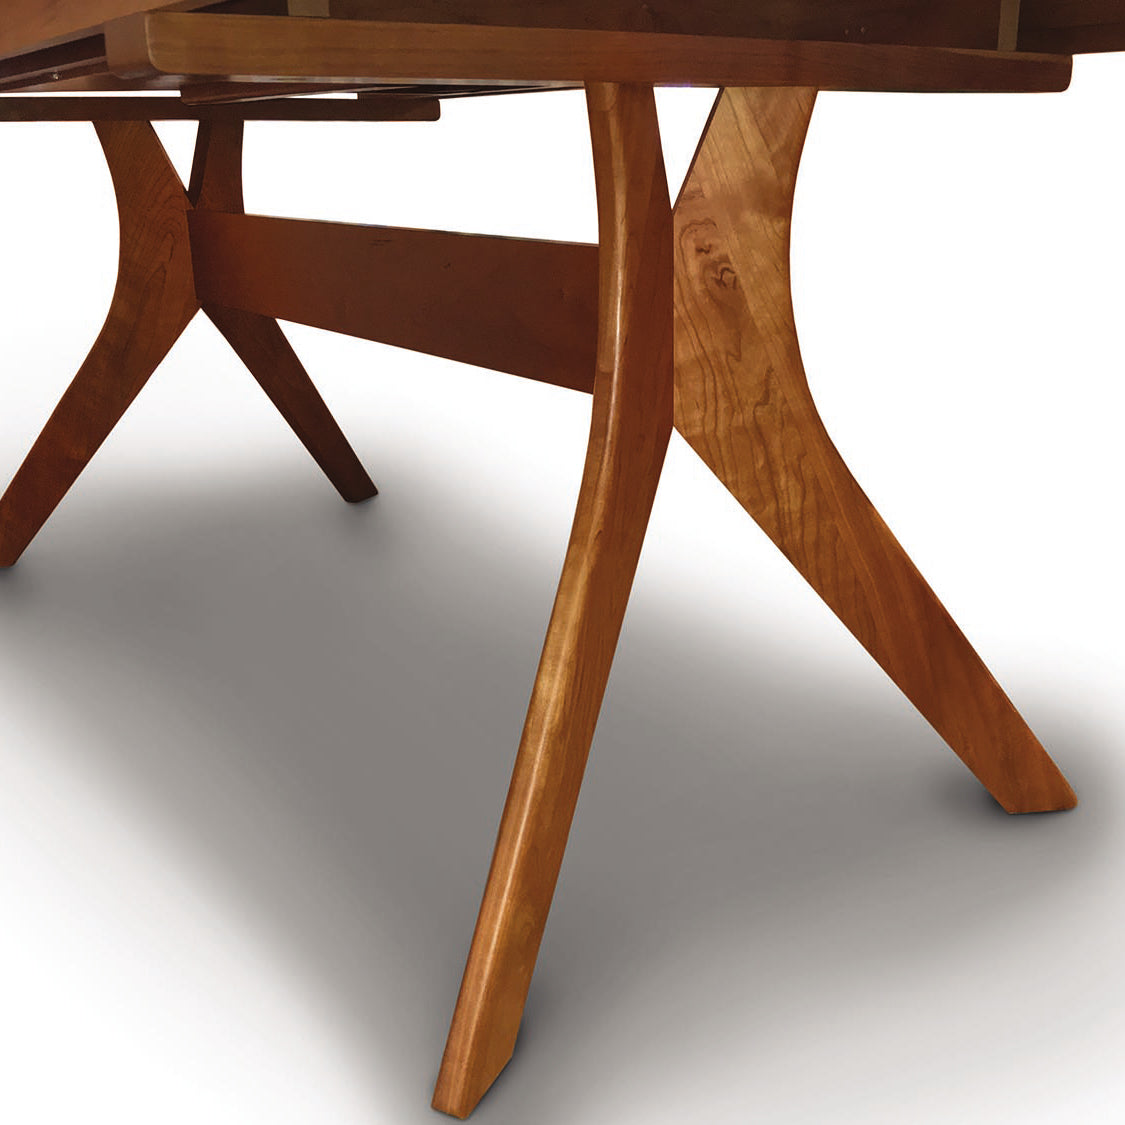 Close-up of a solid cherry wood Audrey Extension Dining Table by Copeland Furniture showing detail of the grain and structure of the legs and underside.